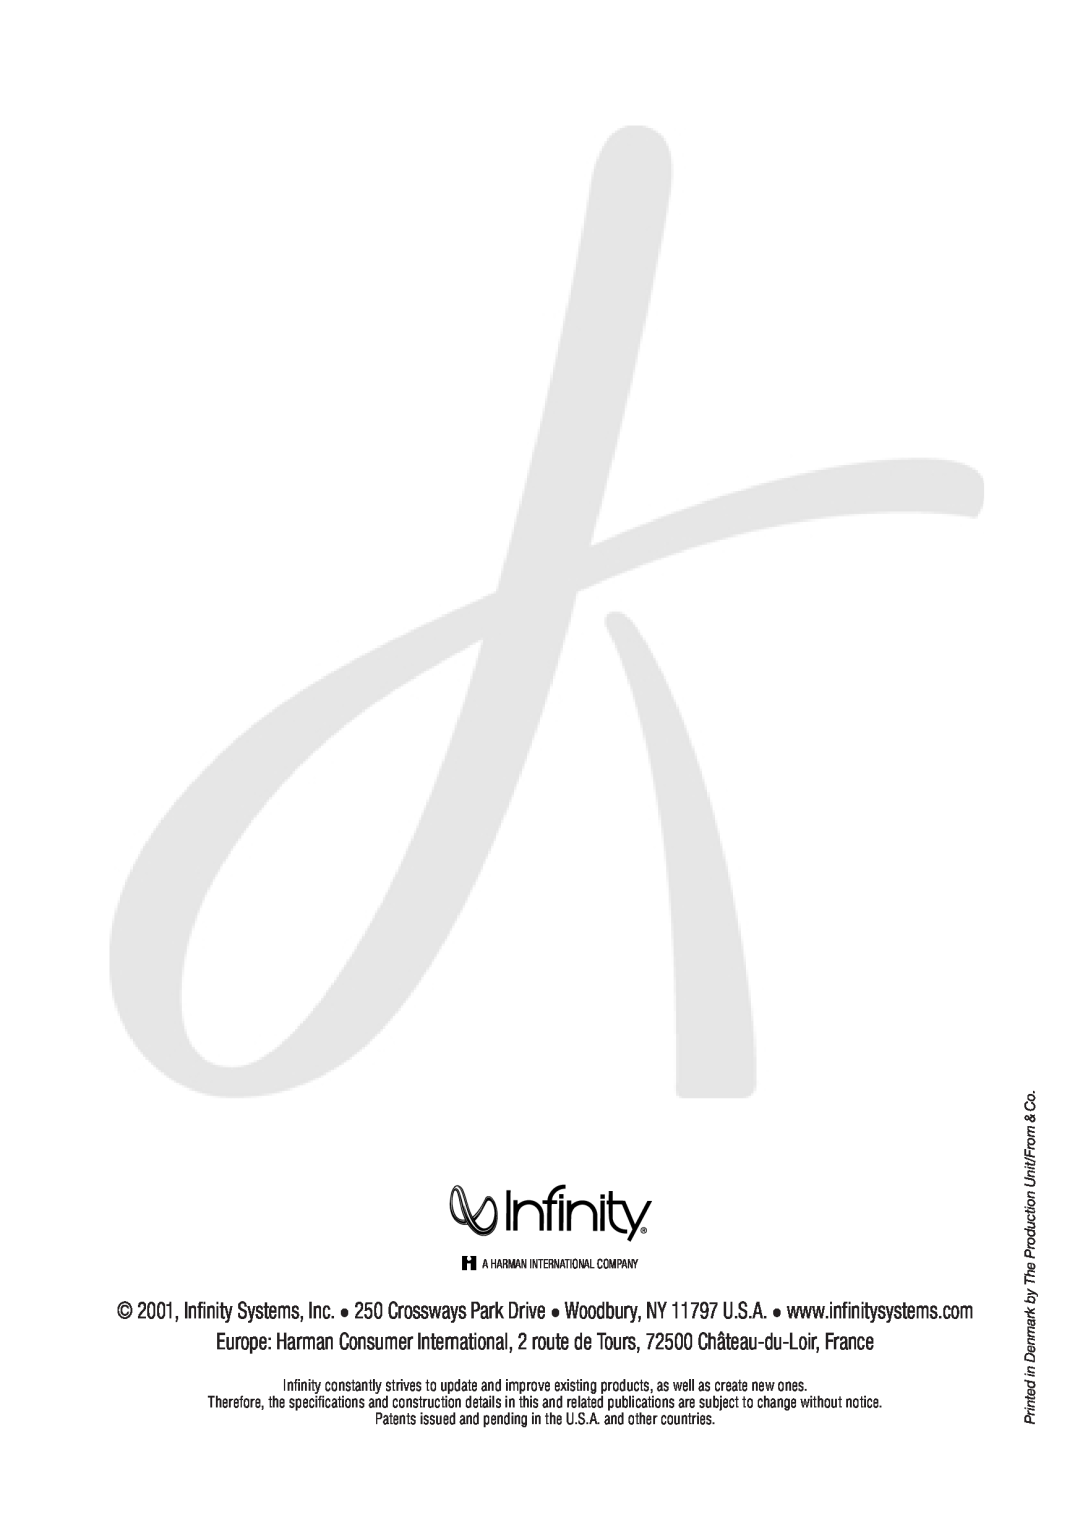 Infinity 10926 instruction manual A Harman International Company, in Denmark by The Production Unit/From & Co, Printed 